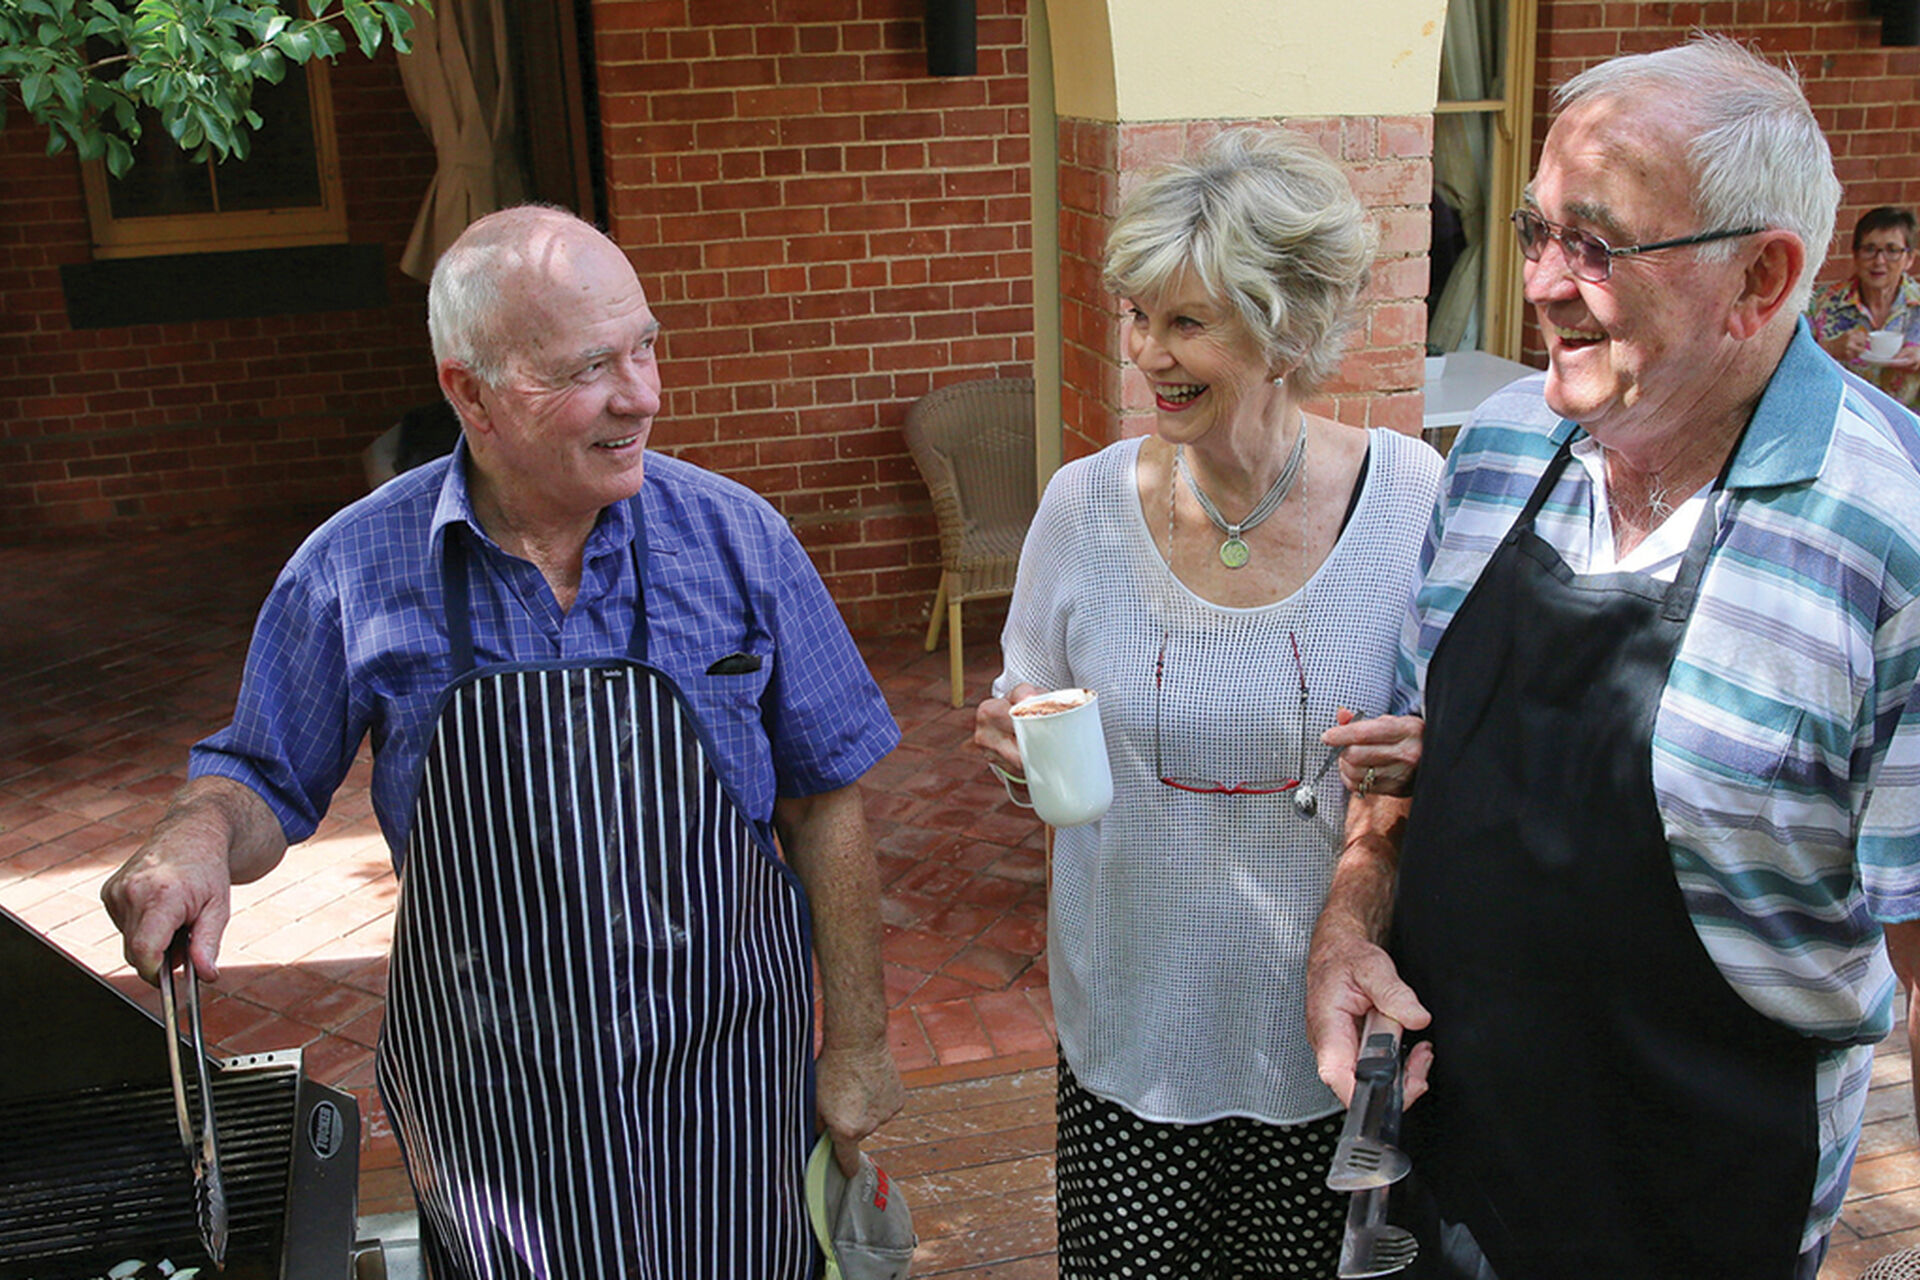 over 55s enjoying cooking a bbq together at their retirement village in Wagga Wagga baptistcare Watermark village